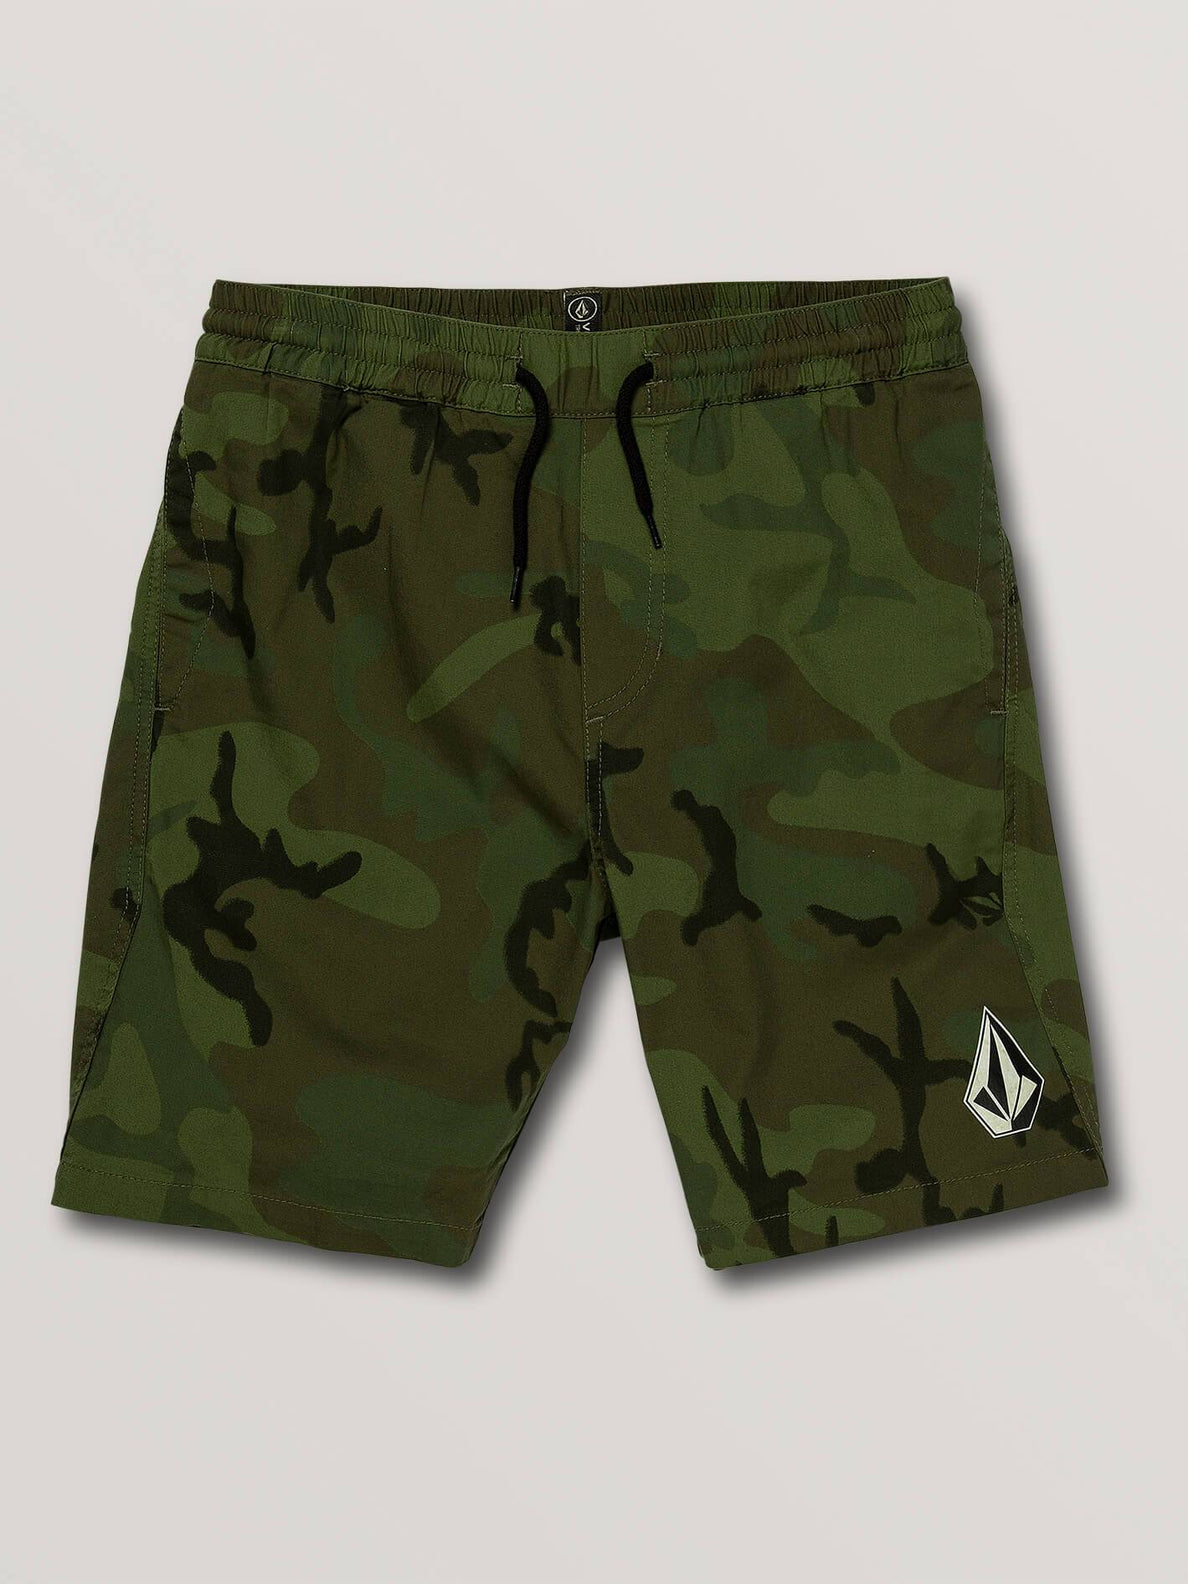 Shorts Deadly Stones - Camouflage (Niňo)